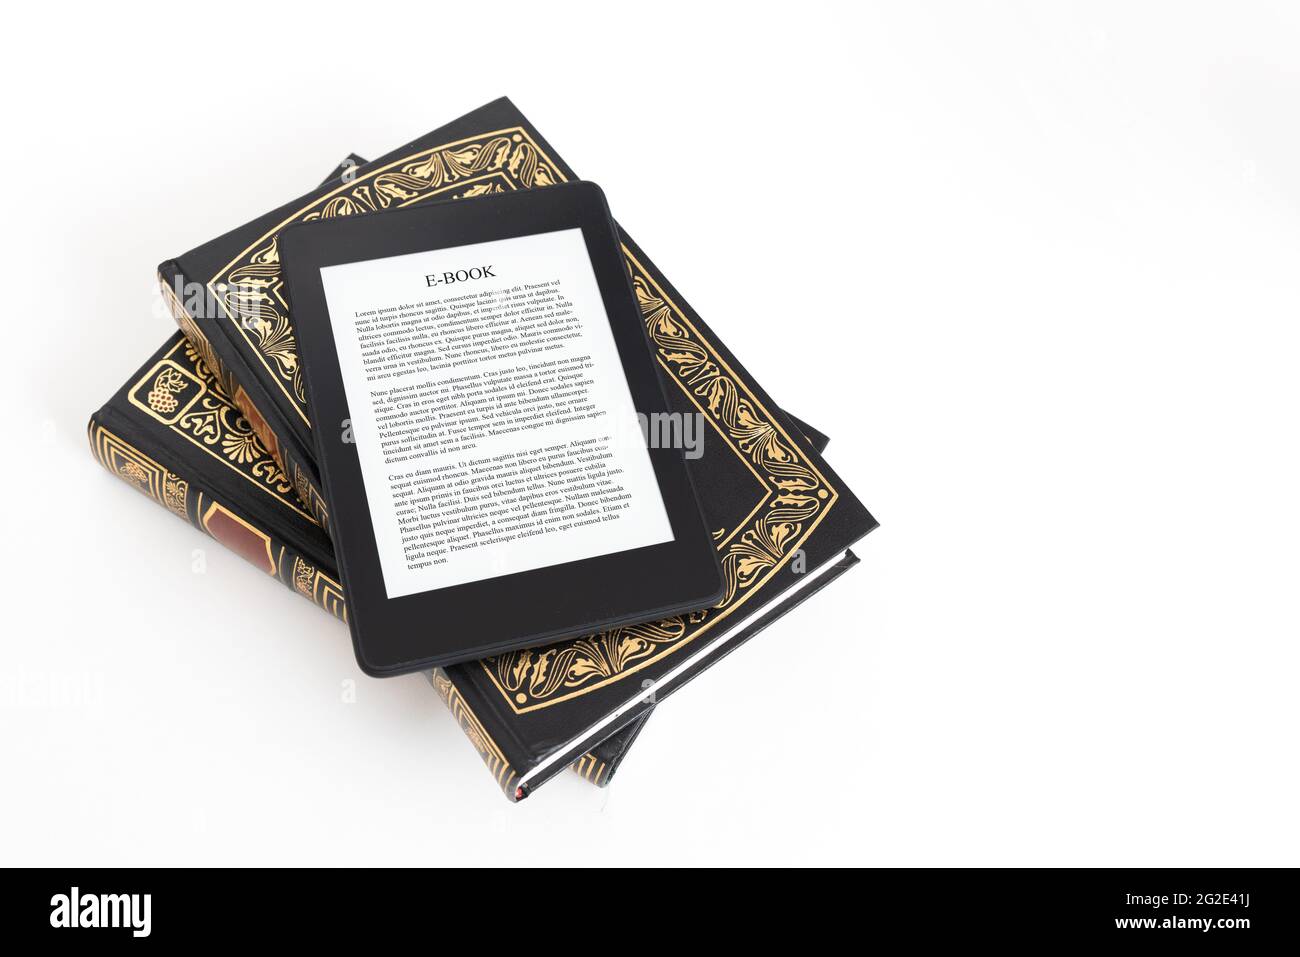 E-book reader with traditional books composition. Book reading with e-book device concept Stock Photo